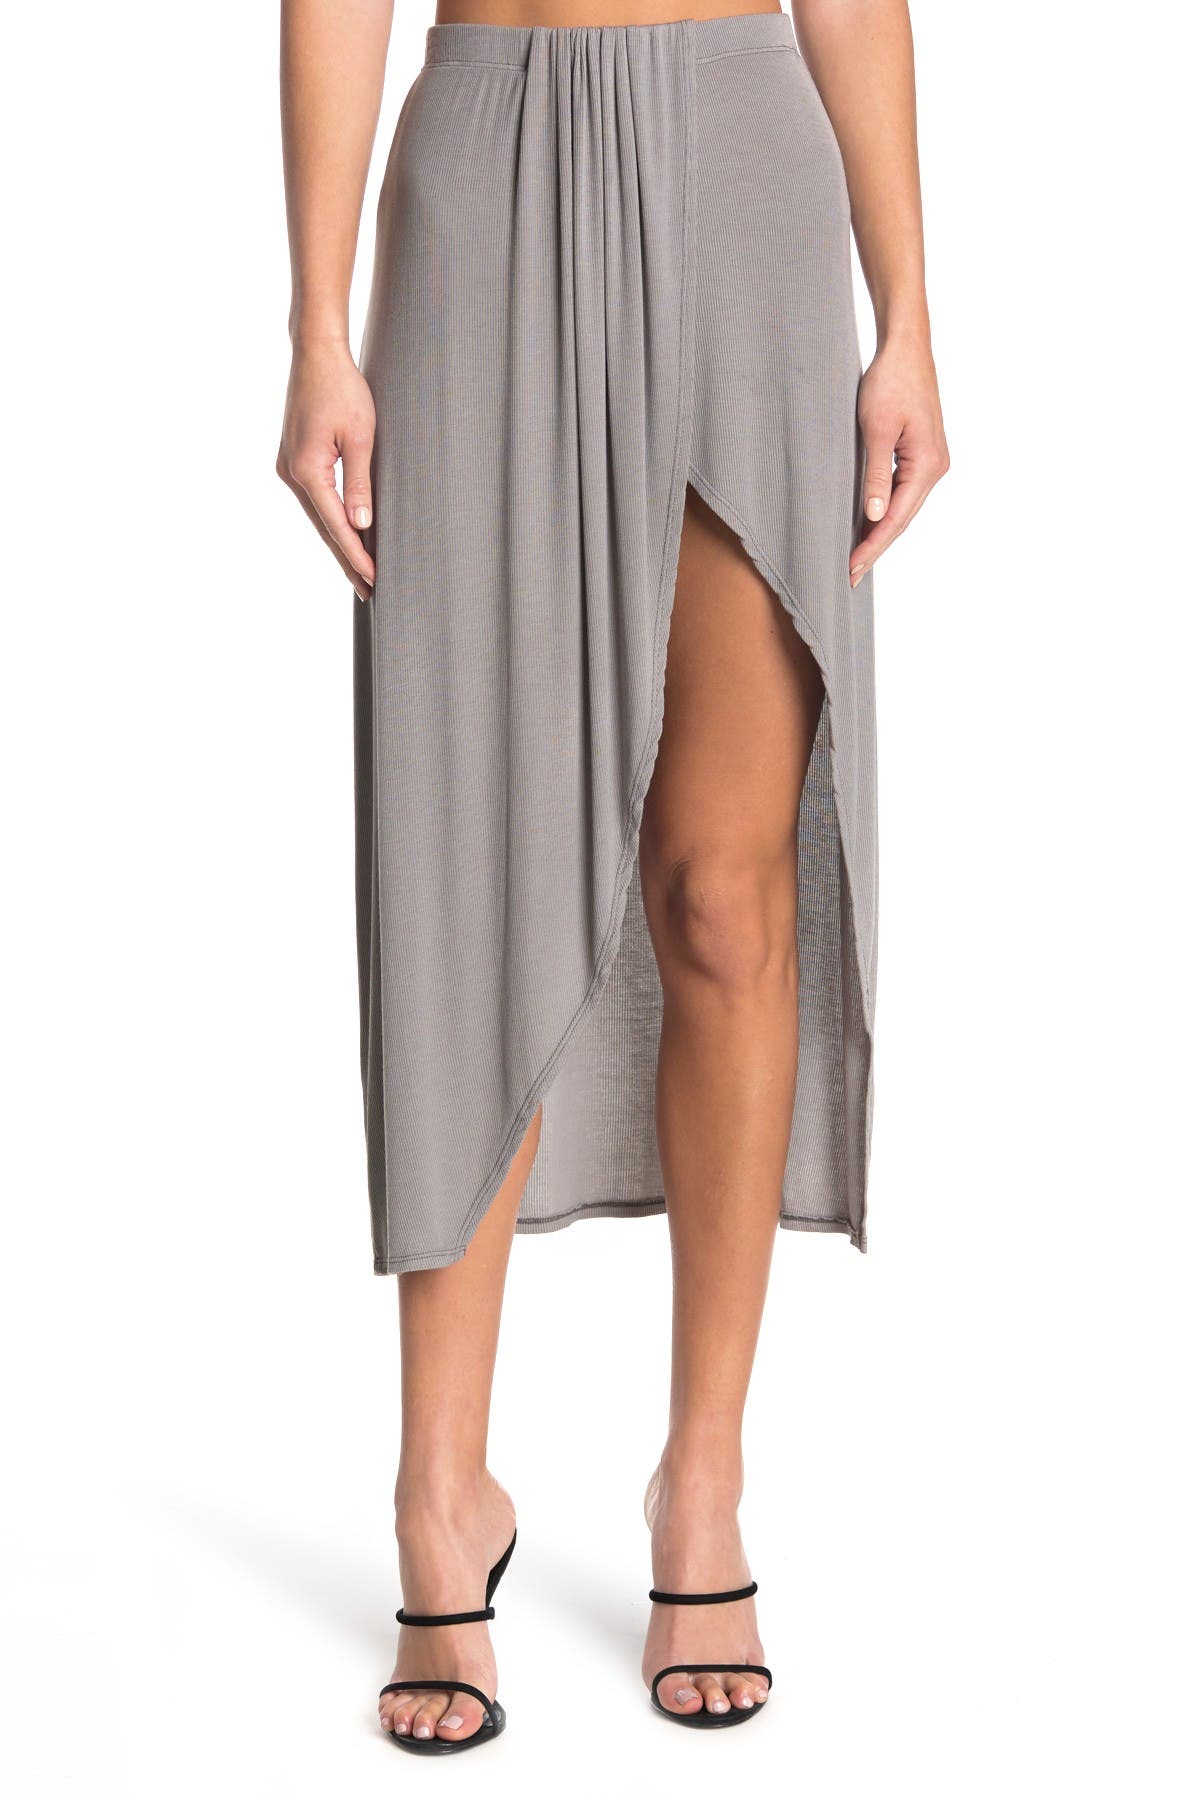 Go Couture Cross Over Slit Maxi Skirt In Heather Grey